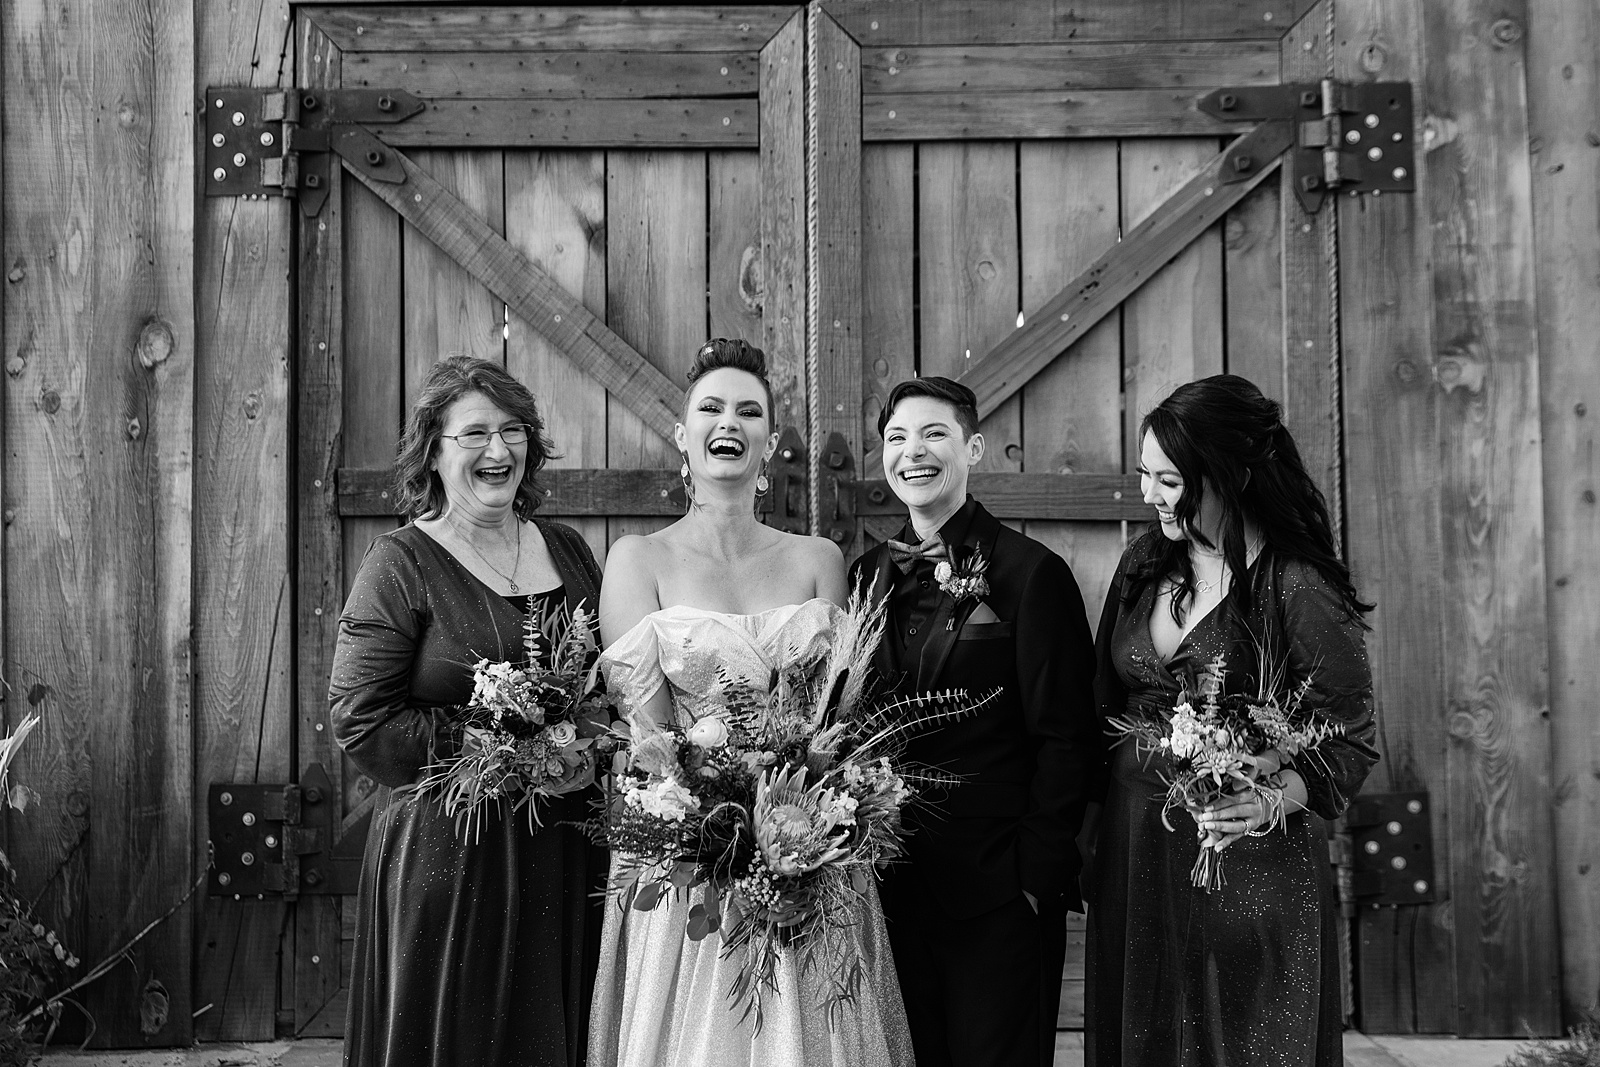 Bridal party laughing together at Mortimer Farms wedding by Prescott wedding photographer PMA Photography.